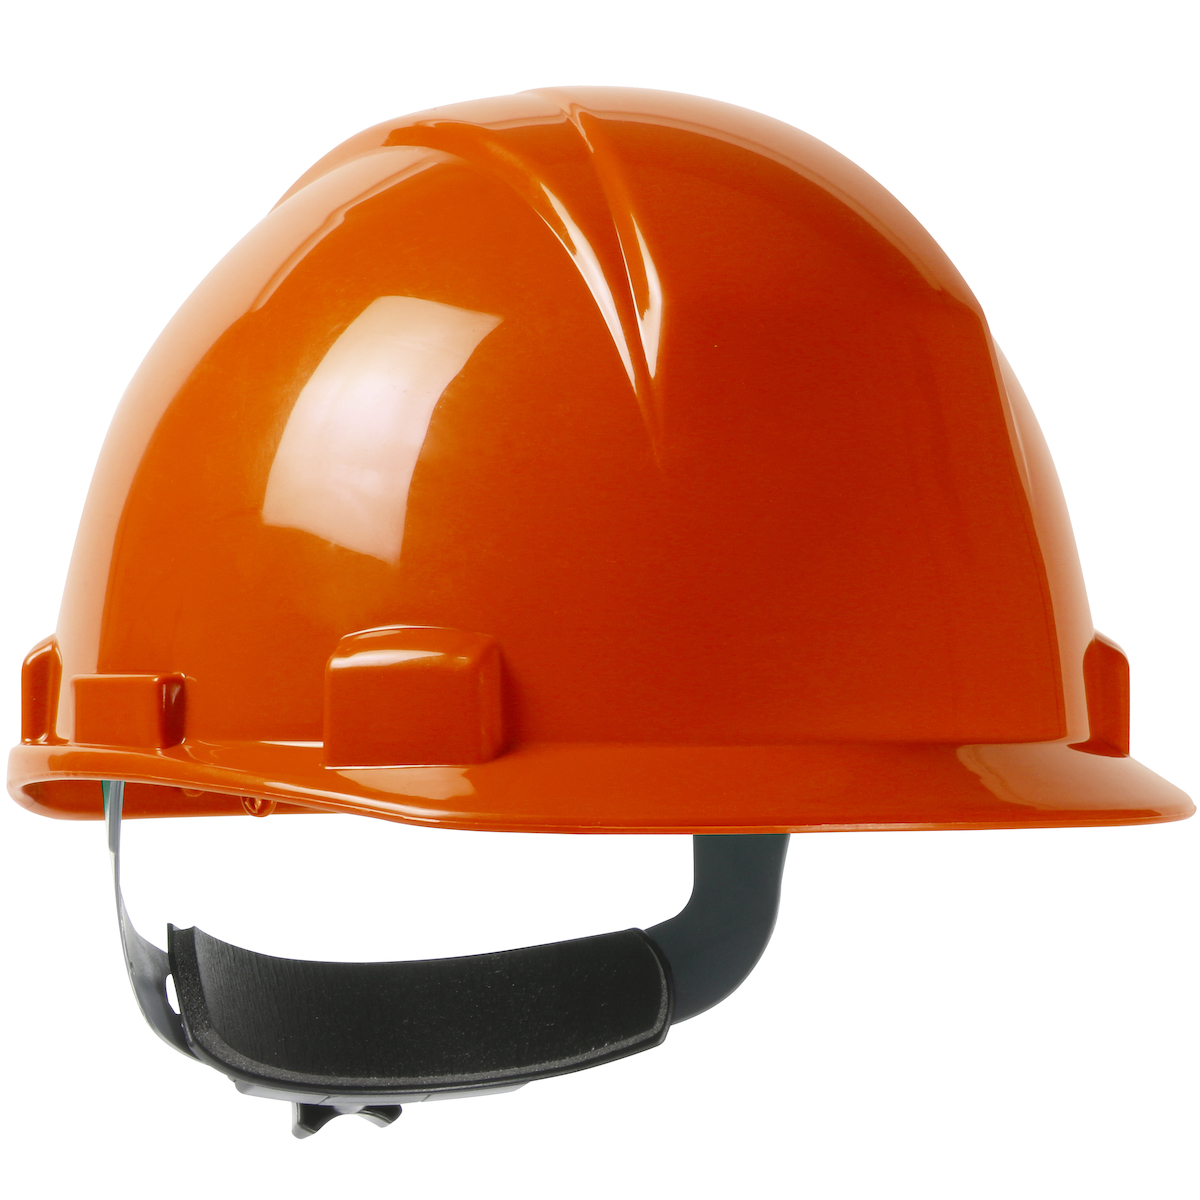 TYPE II, SHORT BRIM CAP STYLE HARD HAT WITH HDPE SHELL, 4-POINT TEXTILE SUSPENSION AND WHEEL RATCHET ADJUSTMENT